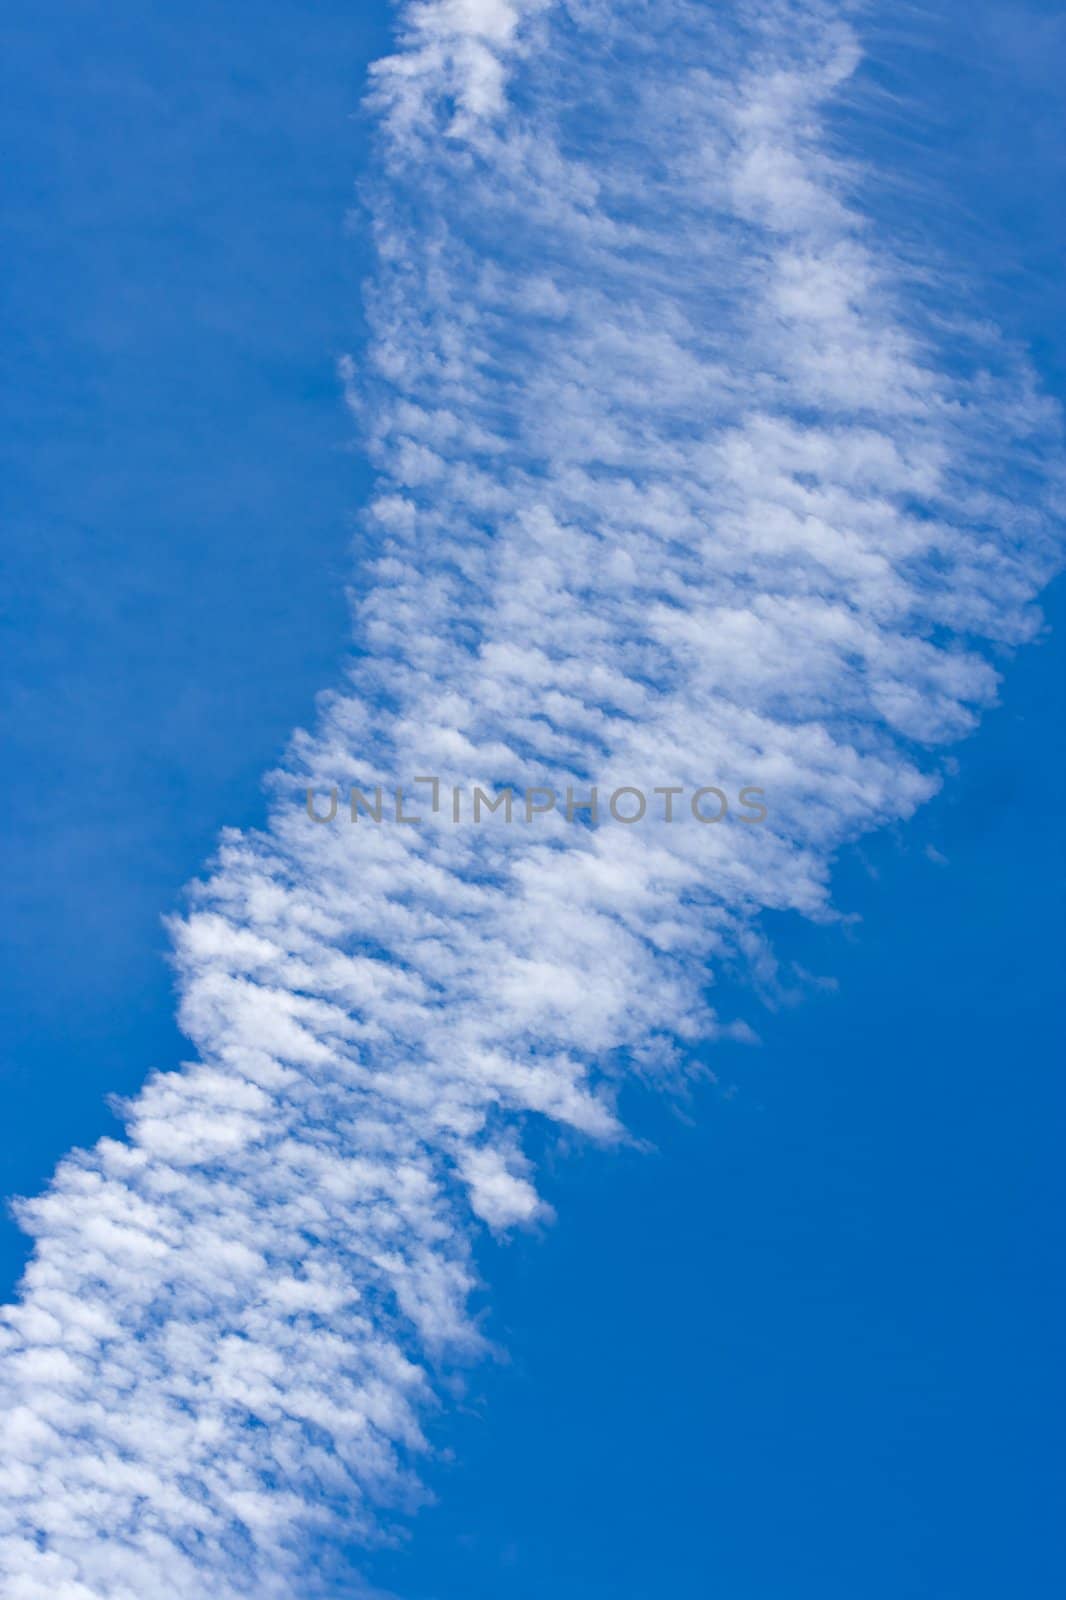 A trail of altocumulus mid-level clouds against a blue sky. The trail of clouds is in a curved formation similar to a cobra snake.